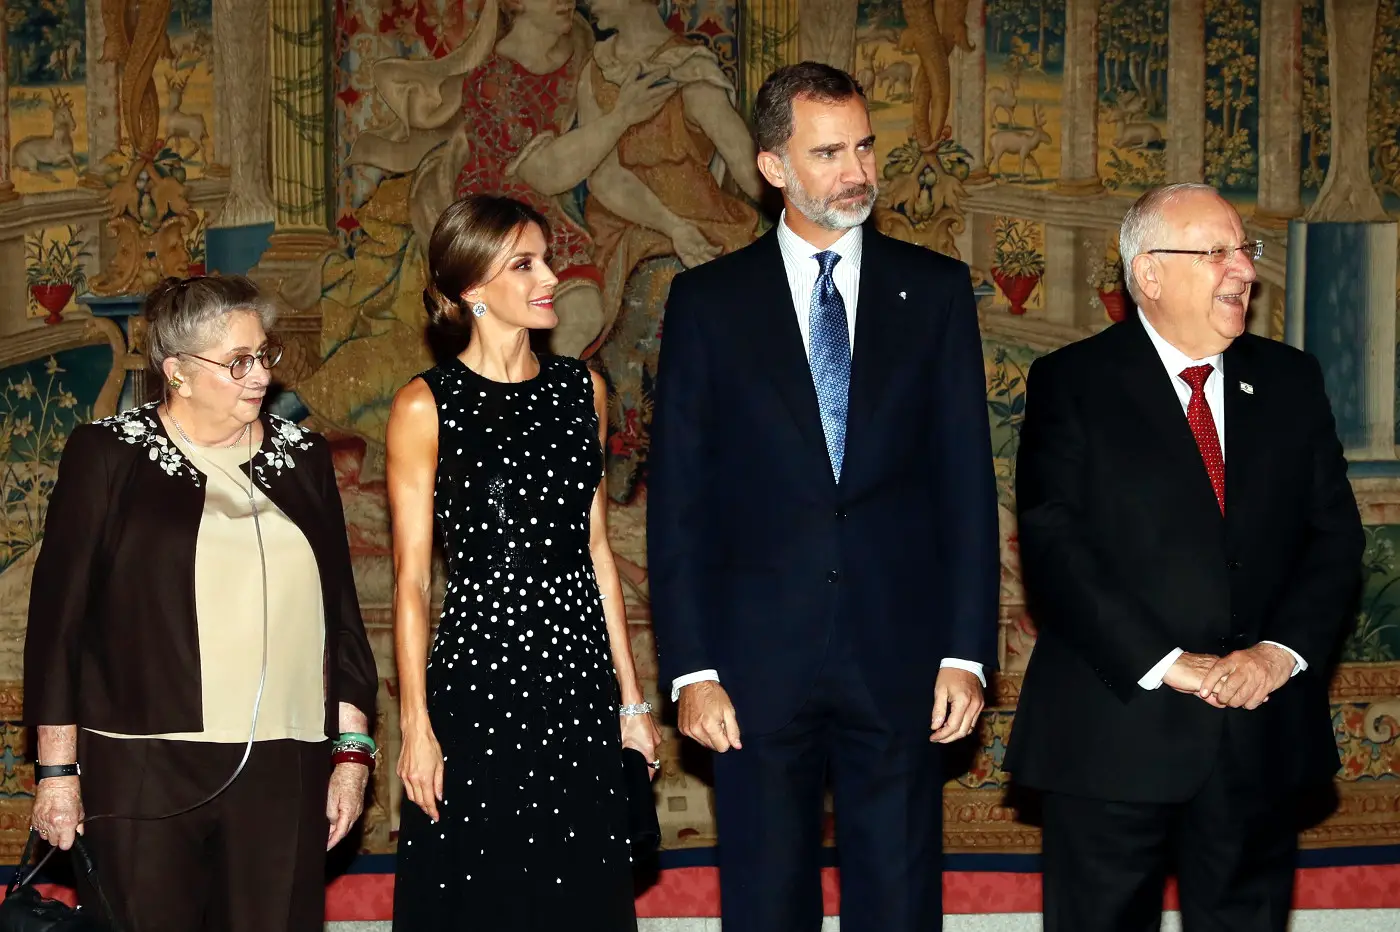 Queen Letizia dazzled in sequins at reception for Israel President